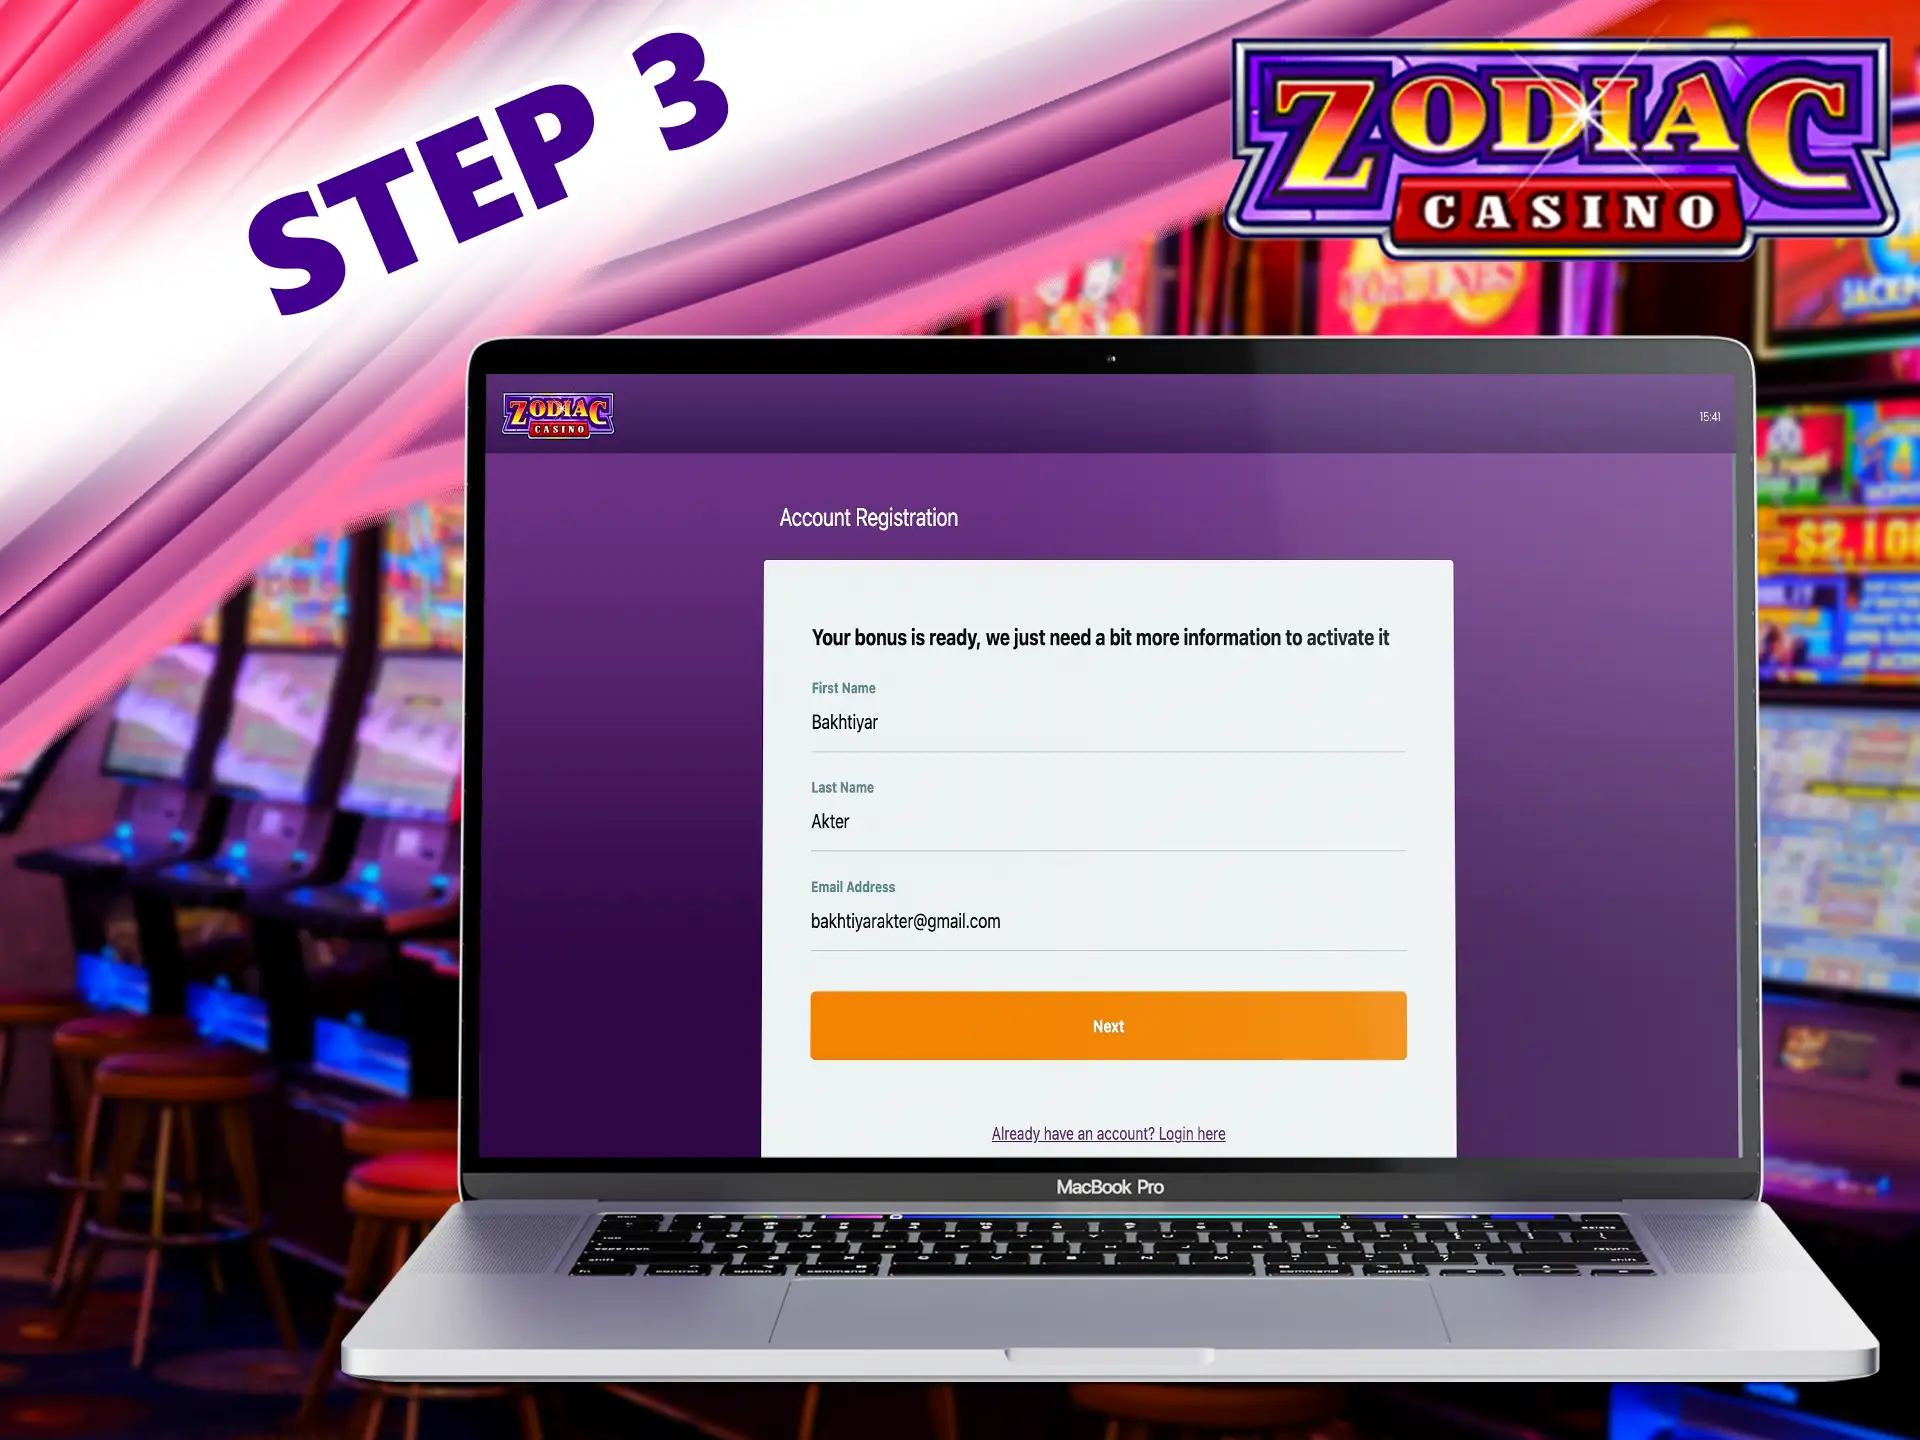 Fill in the actual data fields to further authorize on the site Zodiac Casino.